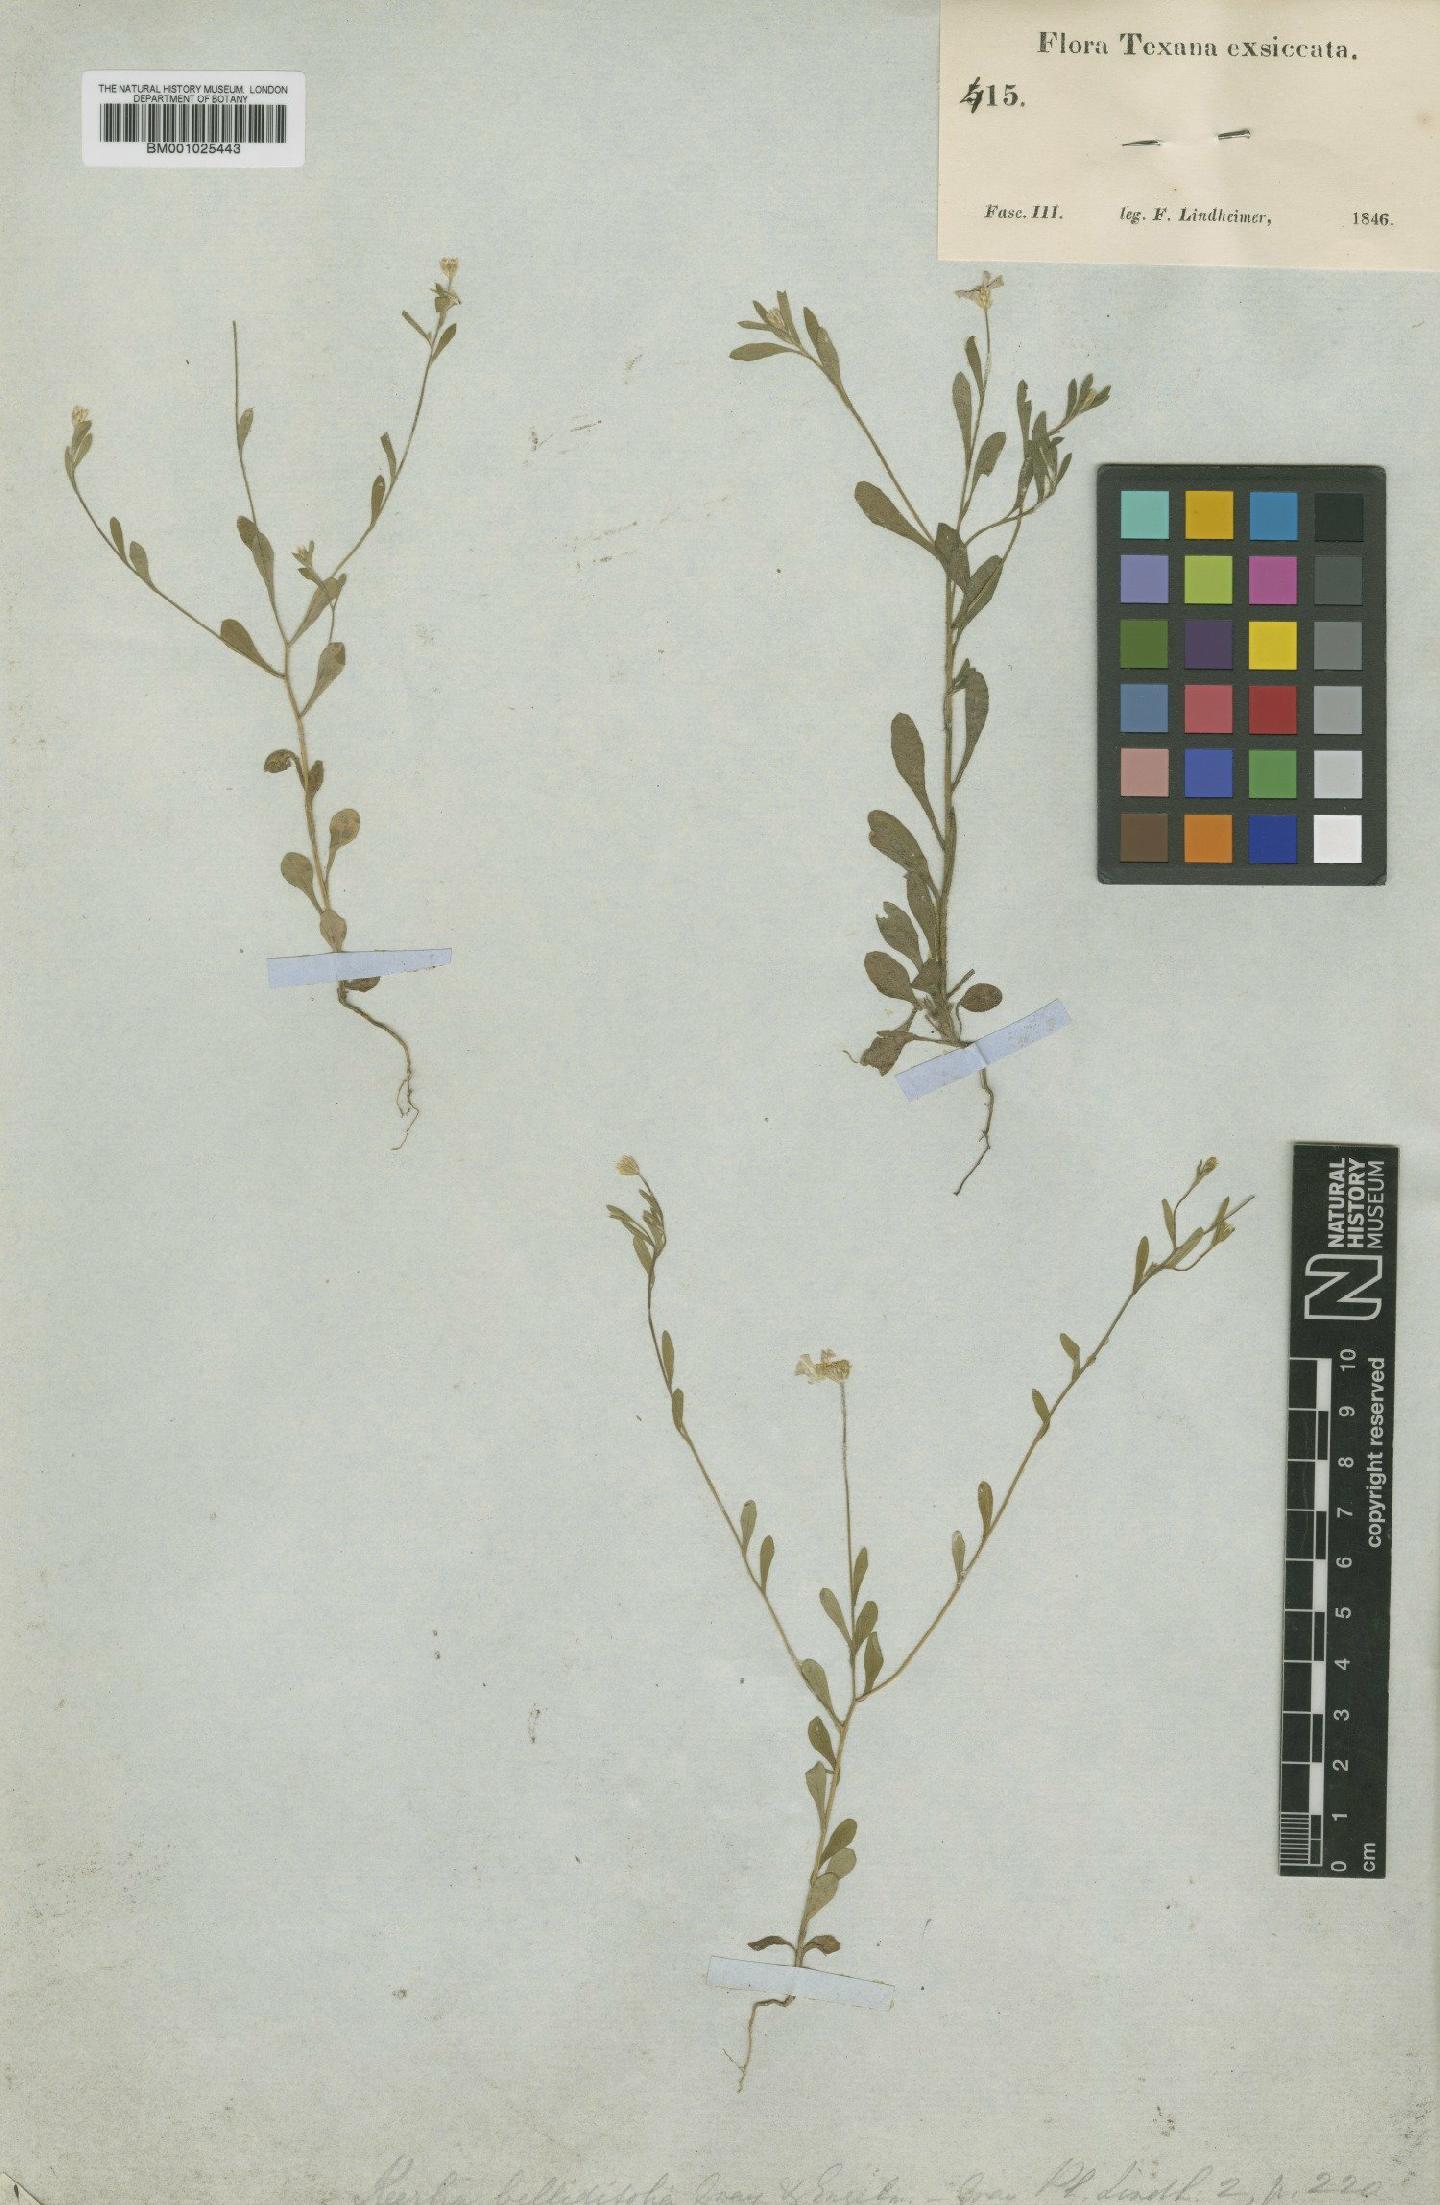 To NHMUK collection (Chaetopappa bellidifolia (A.Gray & Engelm.) Shinners; Type; NHMUK:ecatalogue:749781)